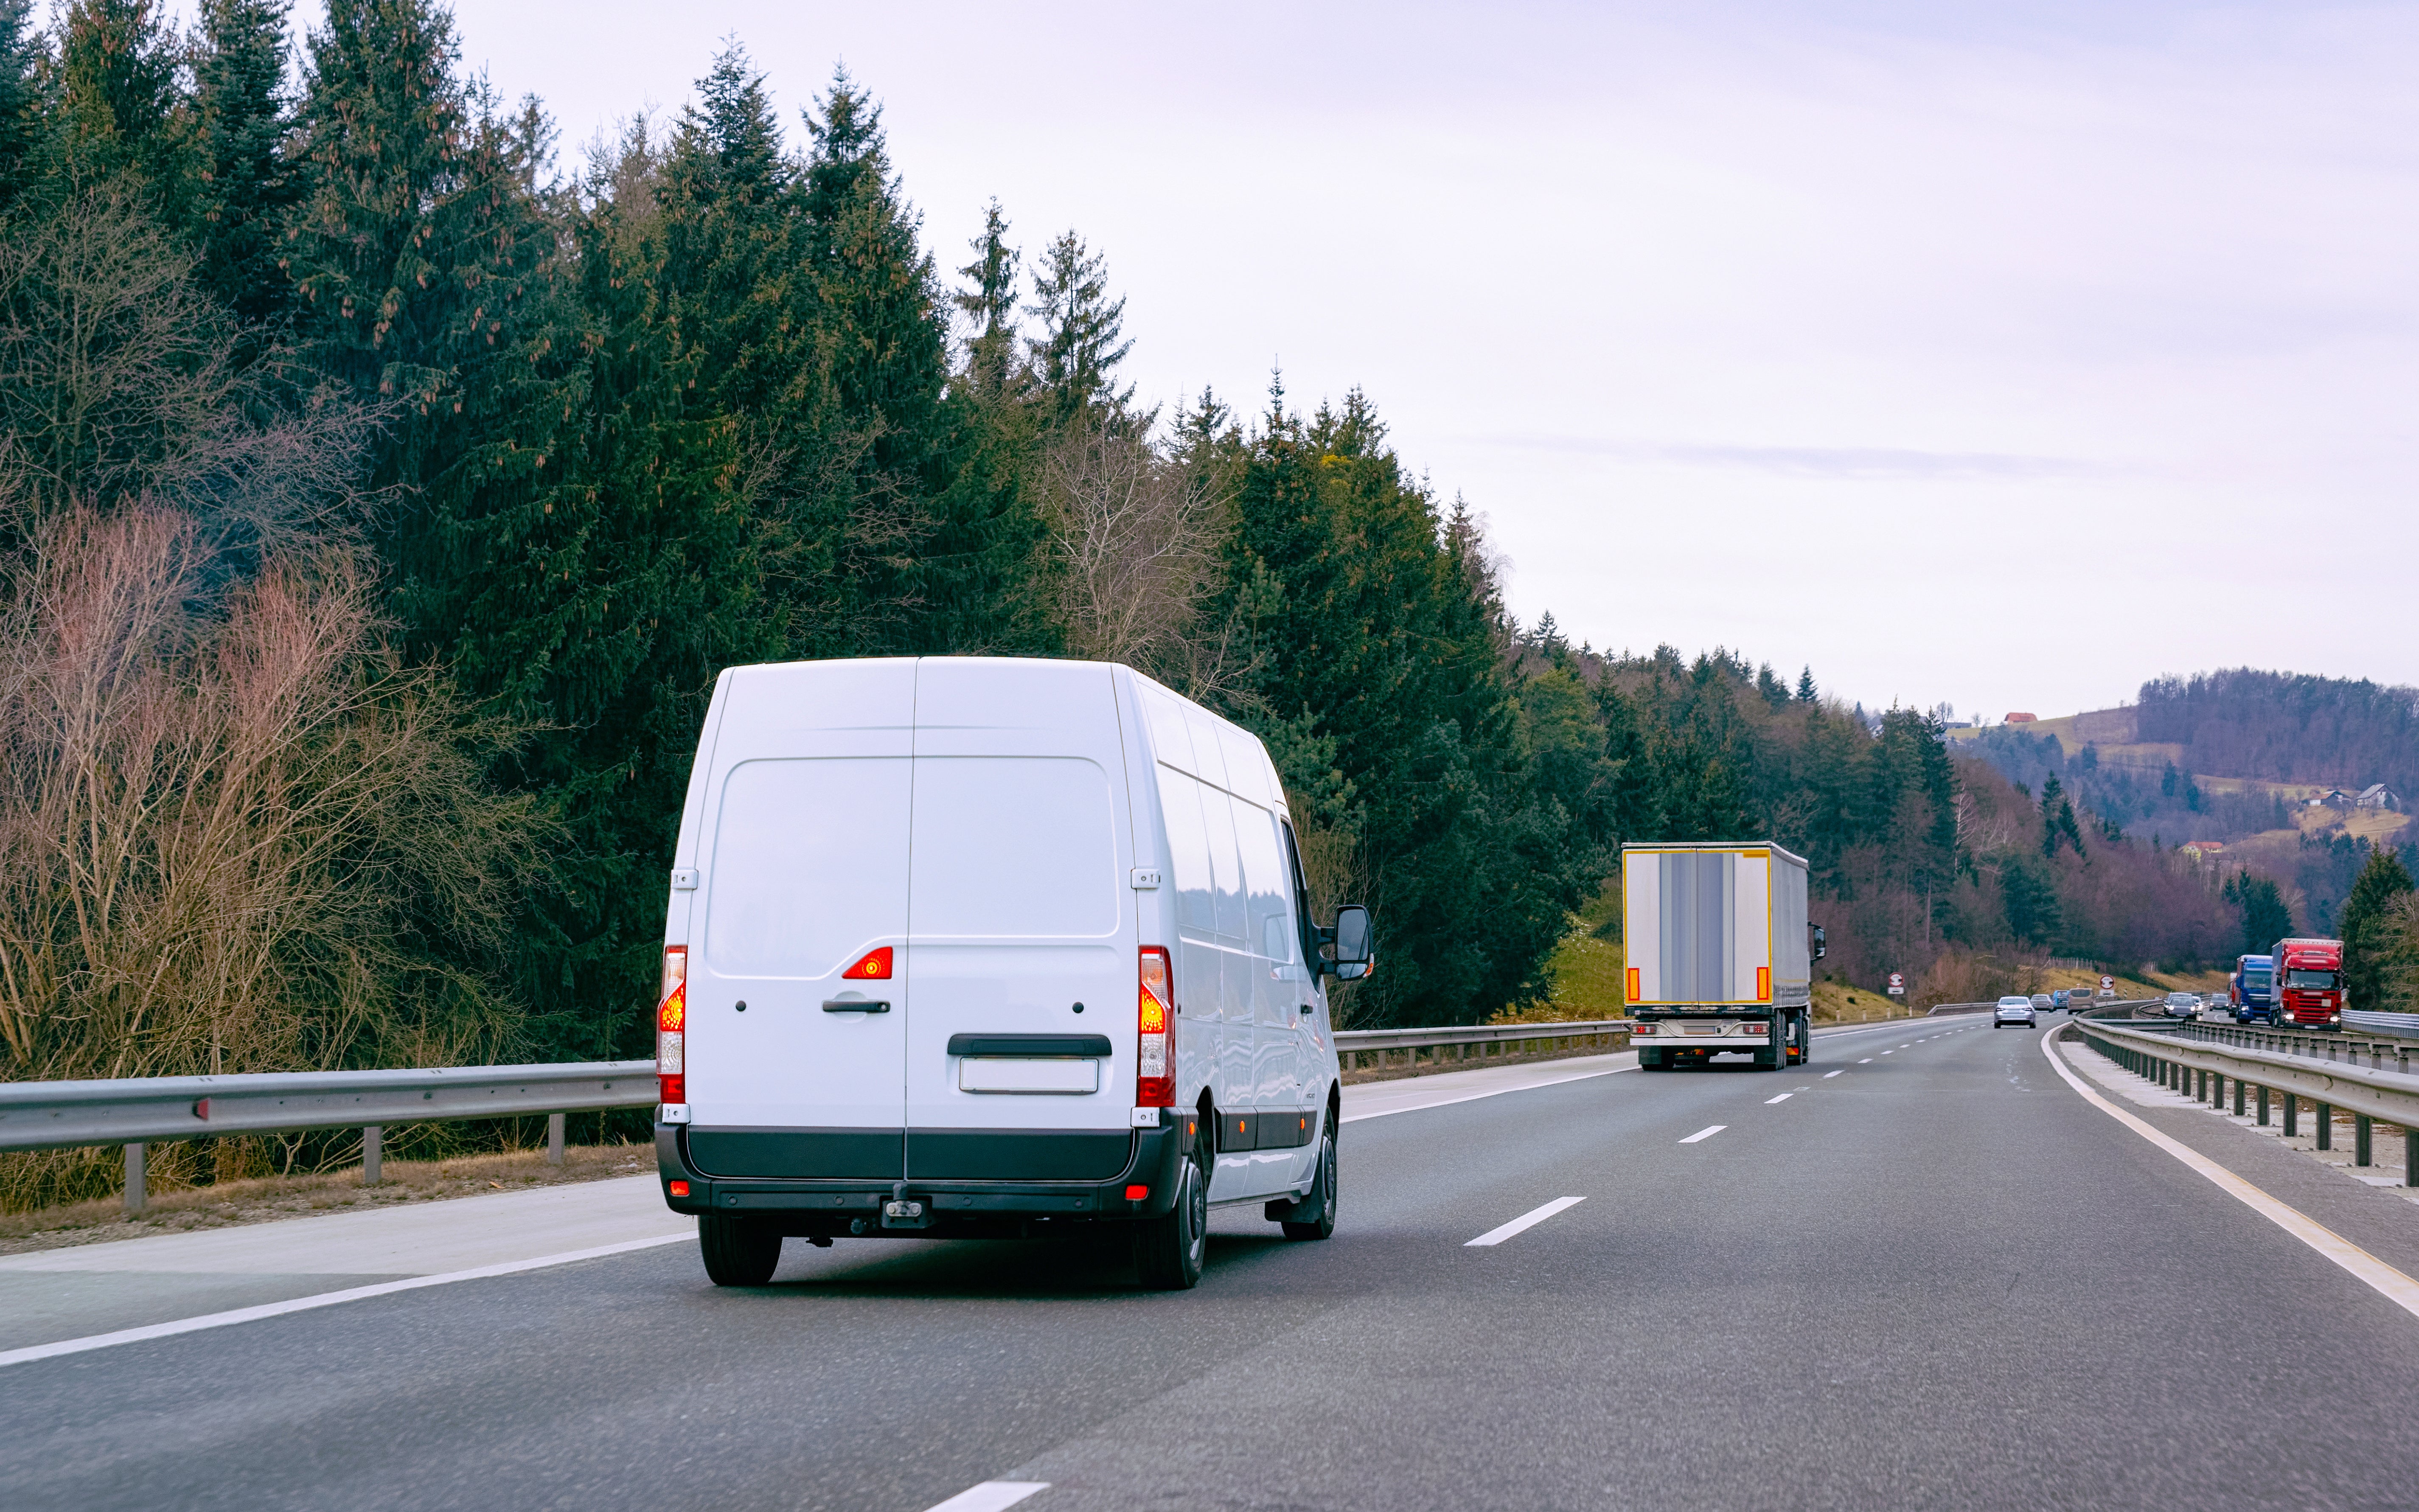 Nearly 35,000 vans were registered in the UK in June